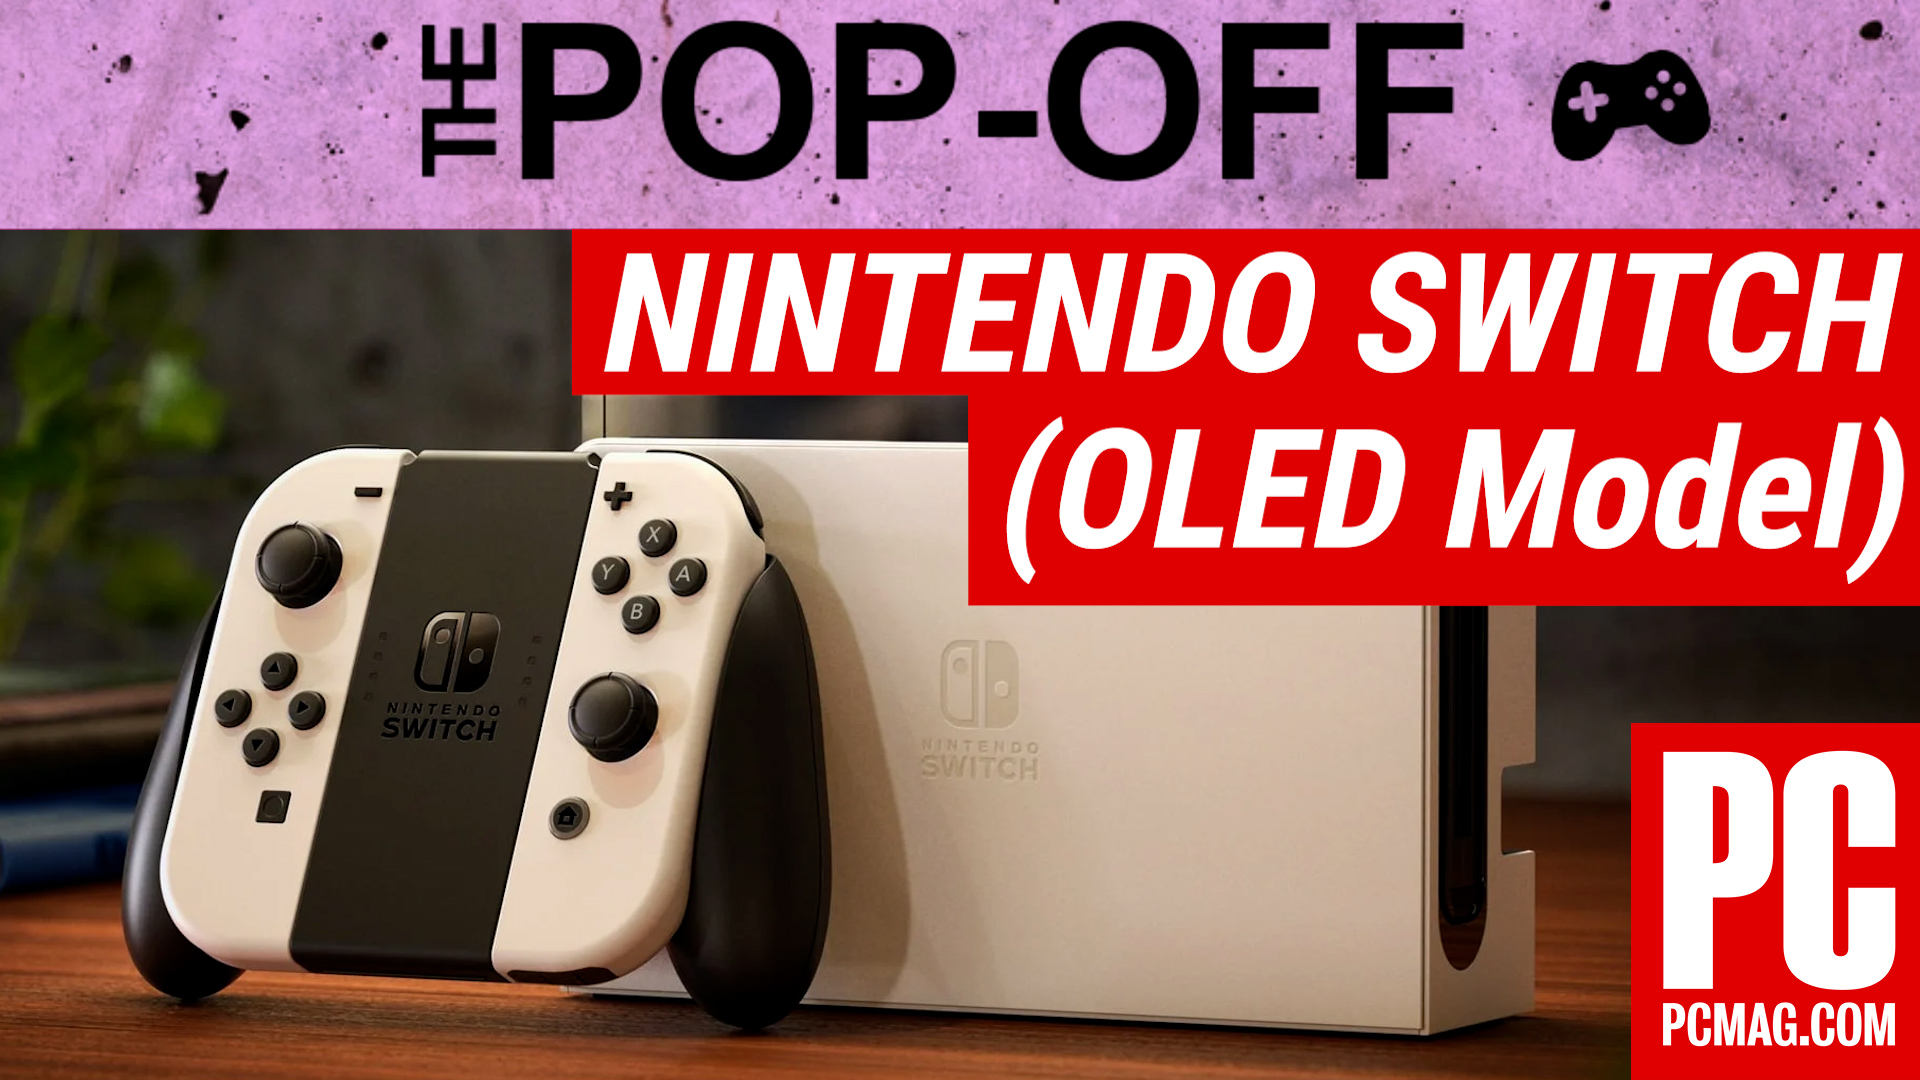 Nintendo Switch (OLED Model): Is This the Switch Pro We Were Waiting For?